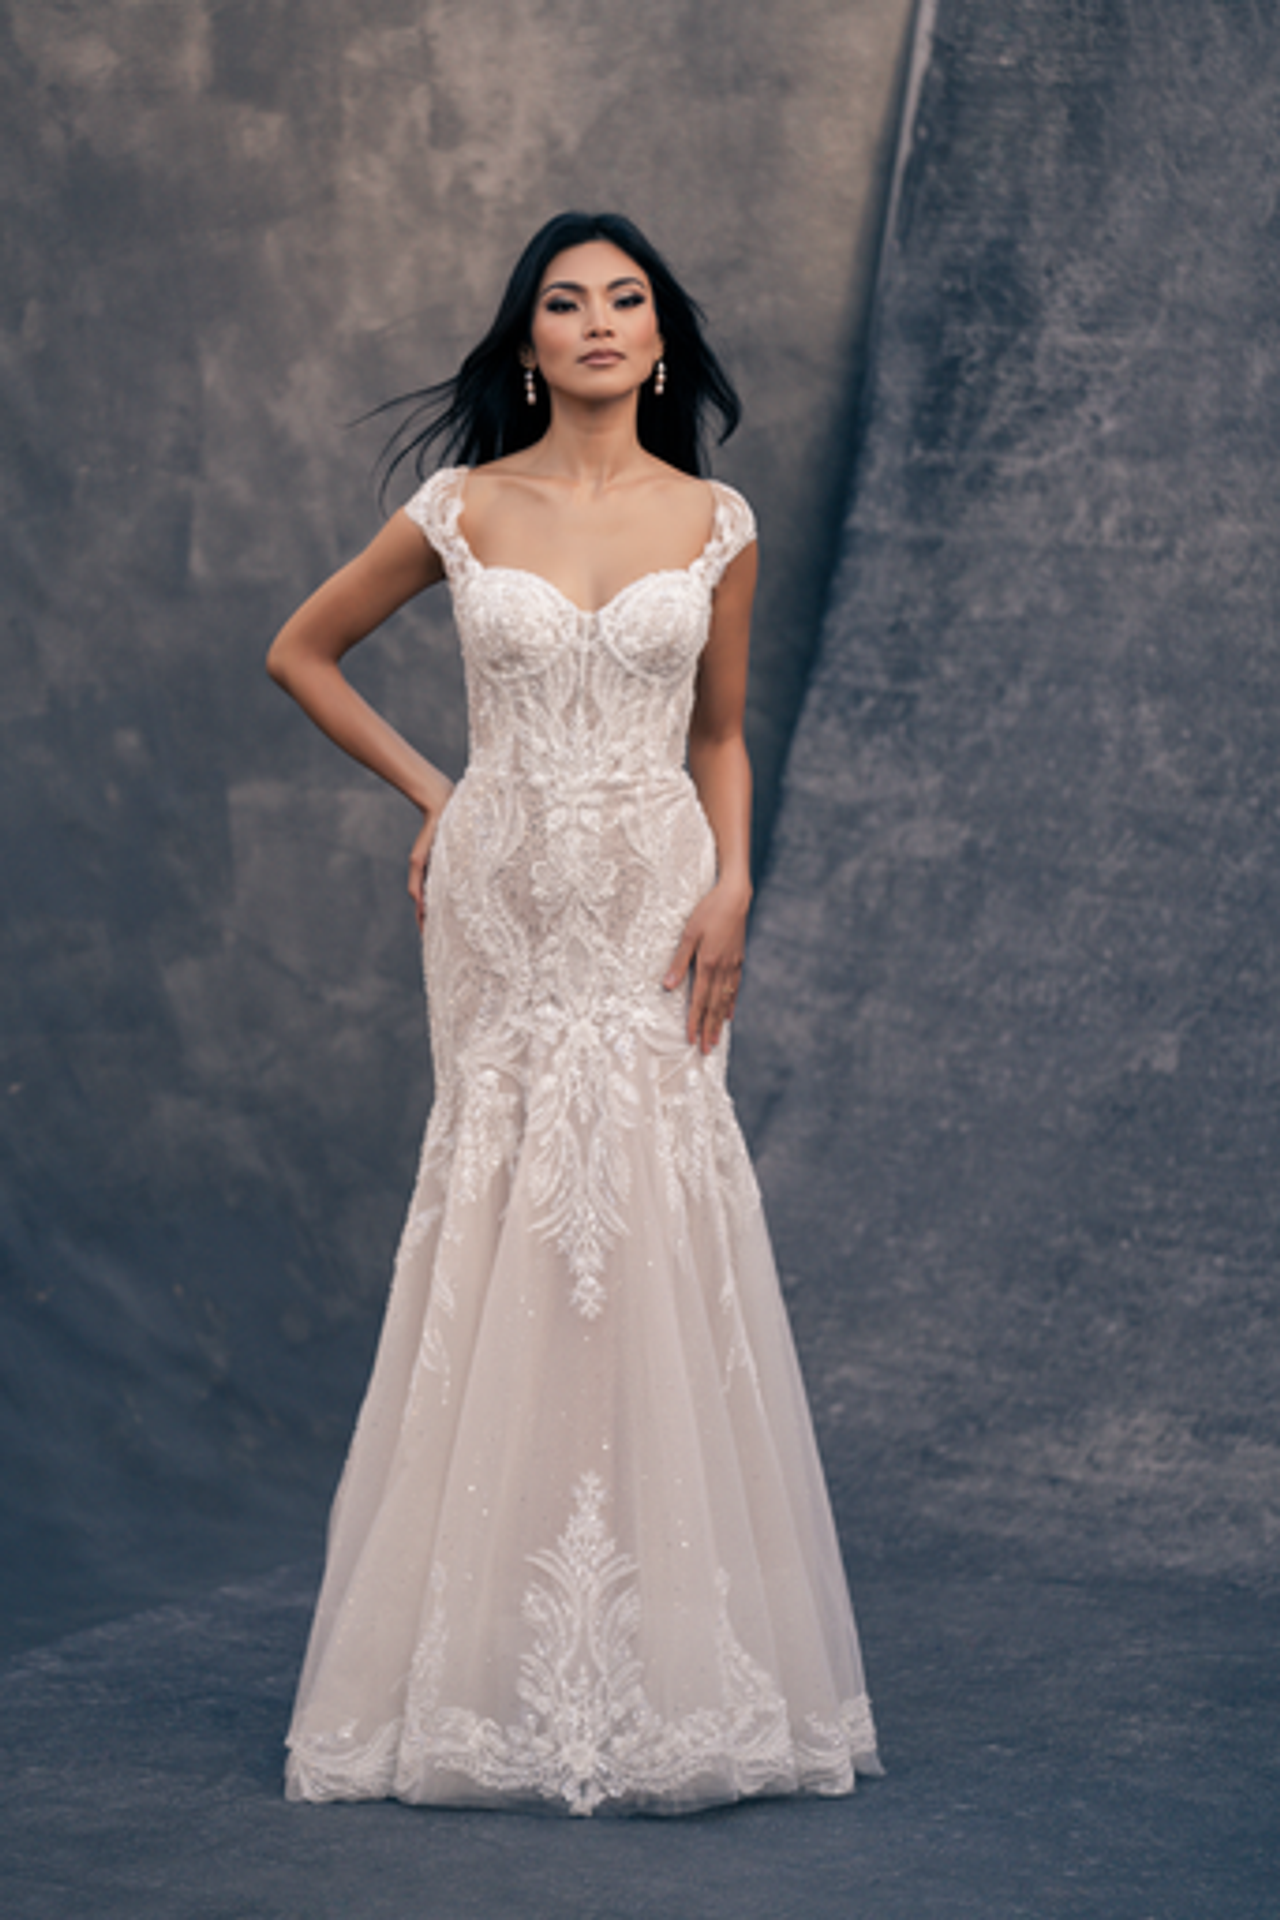 Delicate And Romantic Fit And Flare Gown by Allure Bridals - Image 2